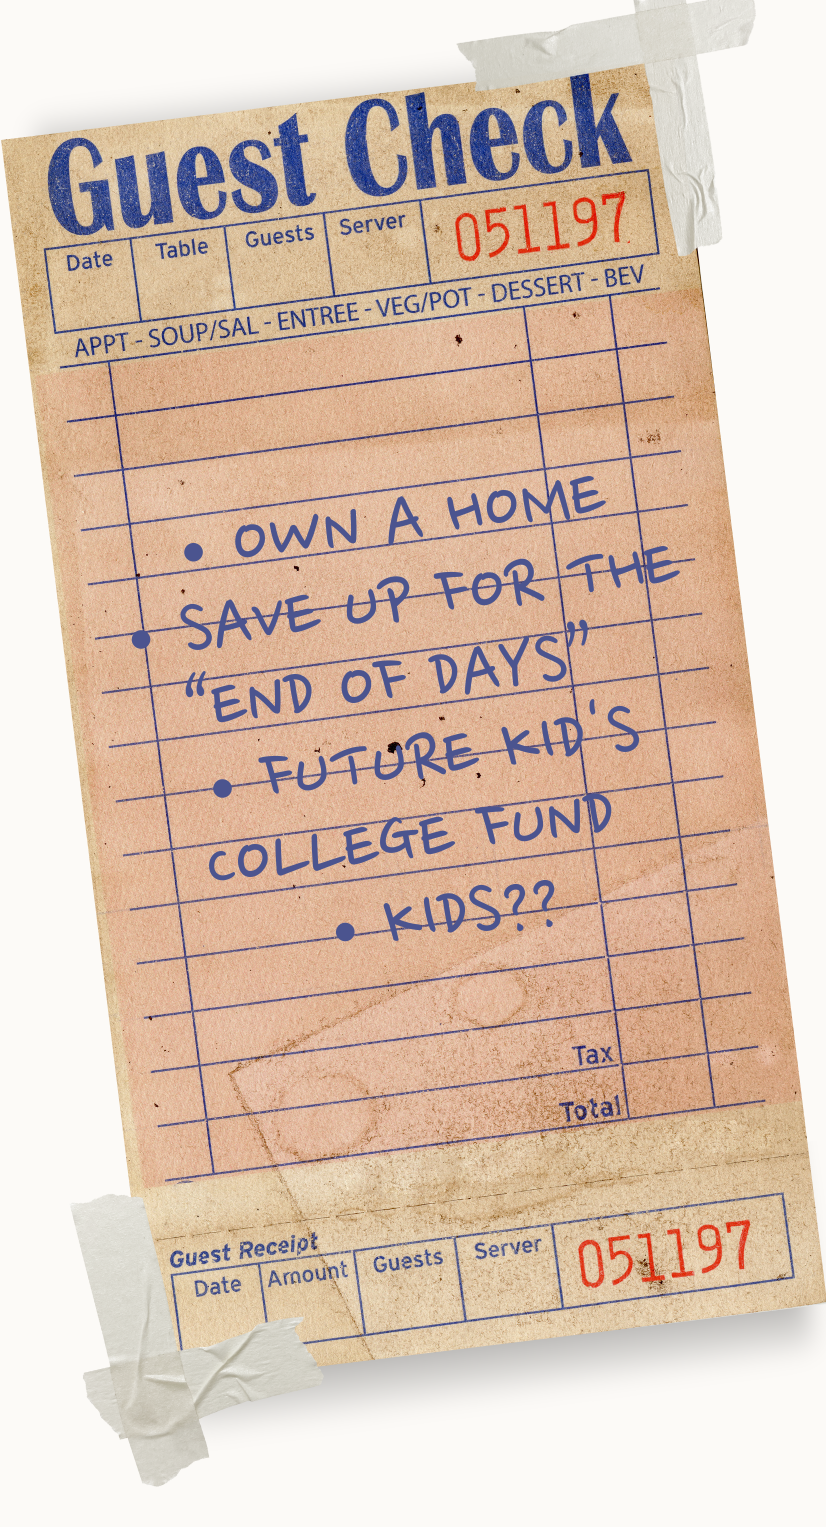 Guest check with handwritten life goals like owning a home and saving for the future